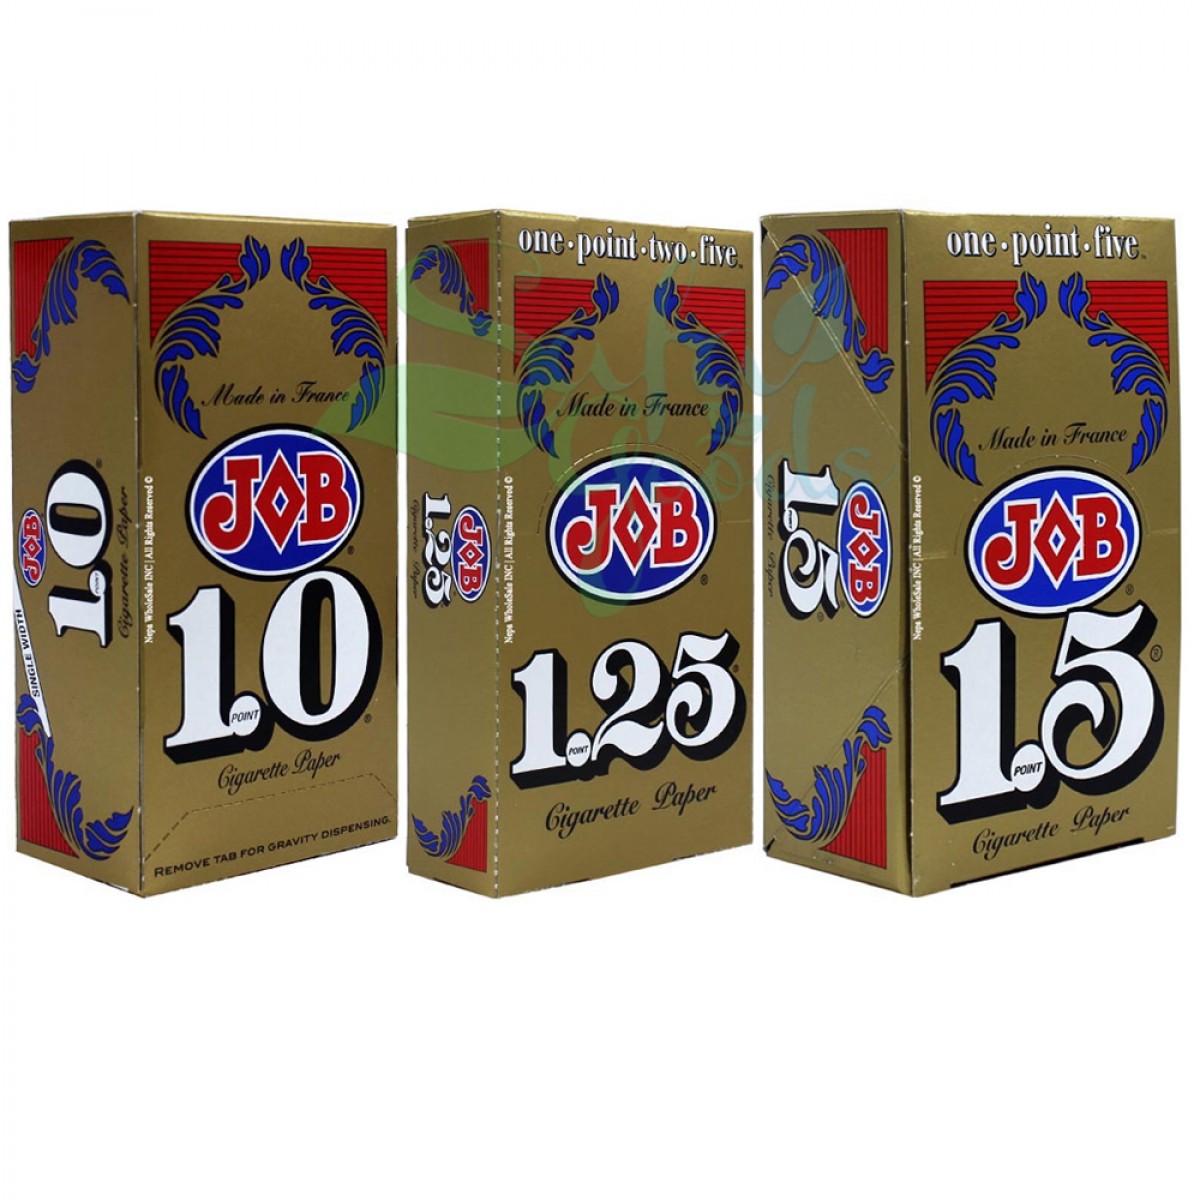 Job Cigarette Rolling Papers Display Box 24CT